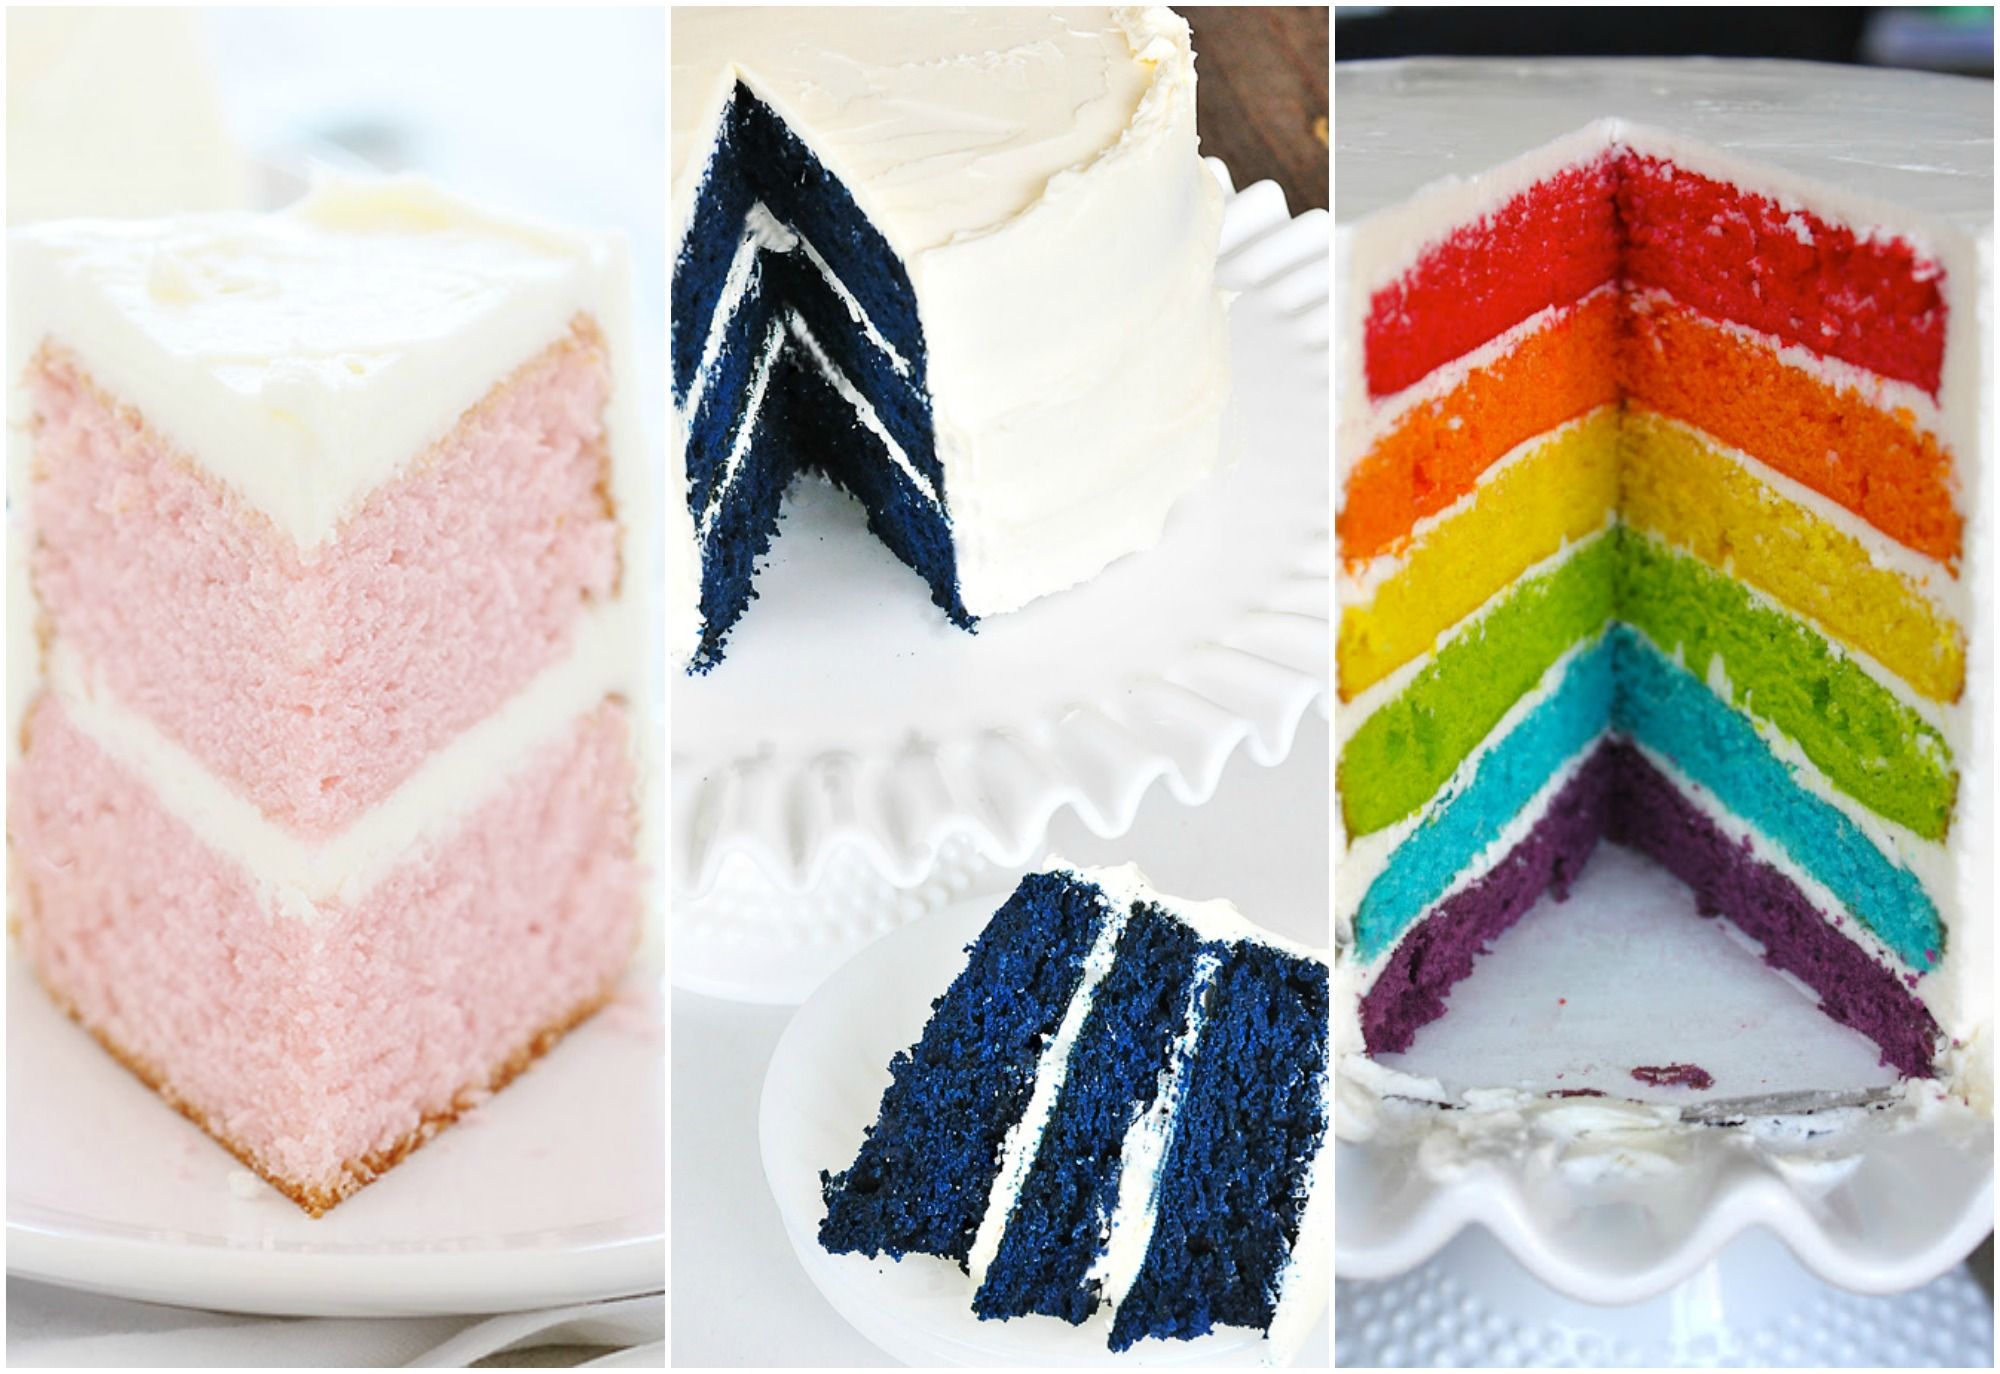 10 Delicious Cake Flavors That Will Delight Your Taste Buds